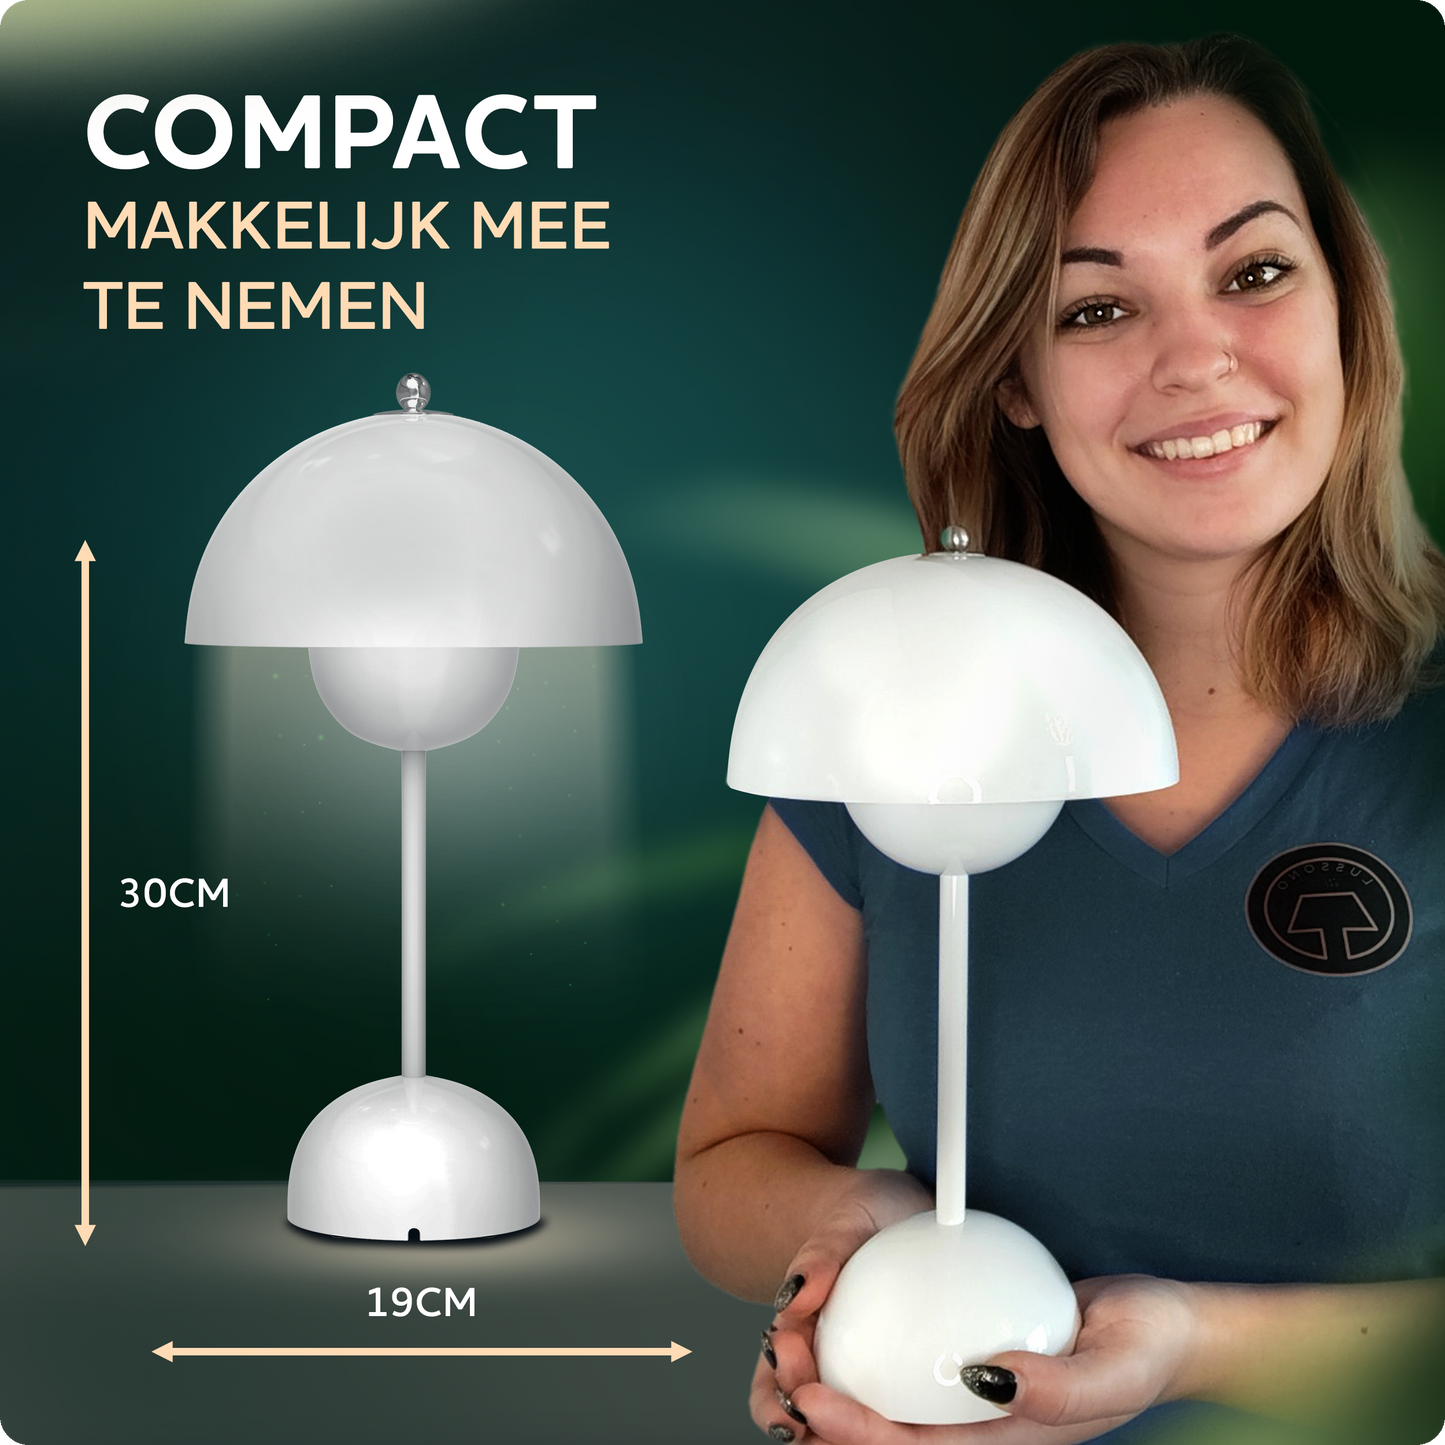 Rechargeable Table Lamp Sfera